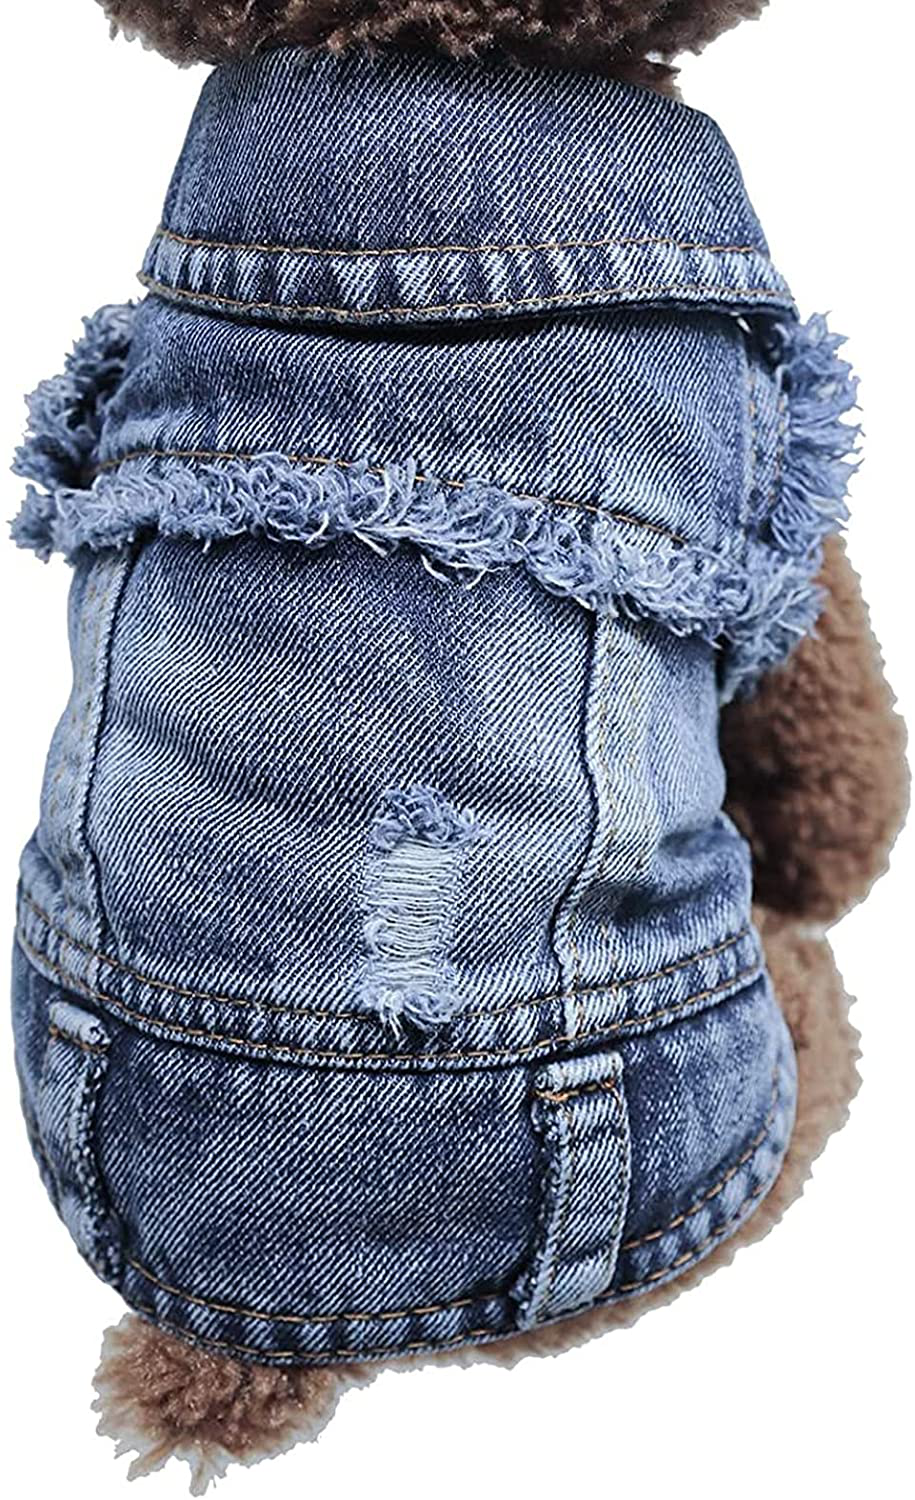 SILD Pet Clothes Dog Jeans Jacket Cool Blue Denim Coat Small Medium Dogs Lapel Vests Classic Hoodies Puppy Blue Vintage Washed Clothes Animals & Pet Supplies > Pet Supplies > Dog Supplies > Dog Apparel SILD Blue D Small 